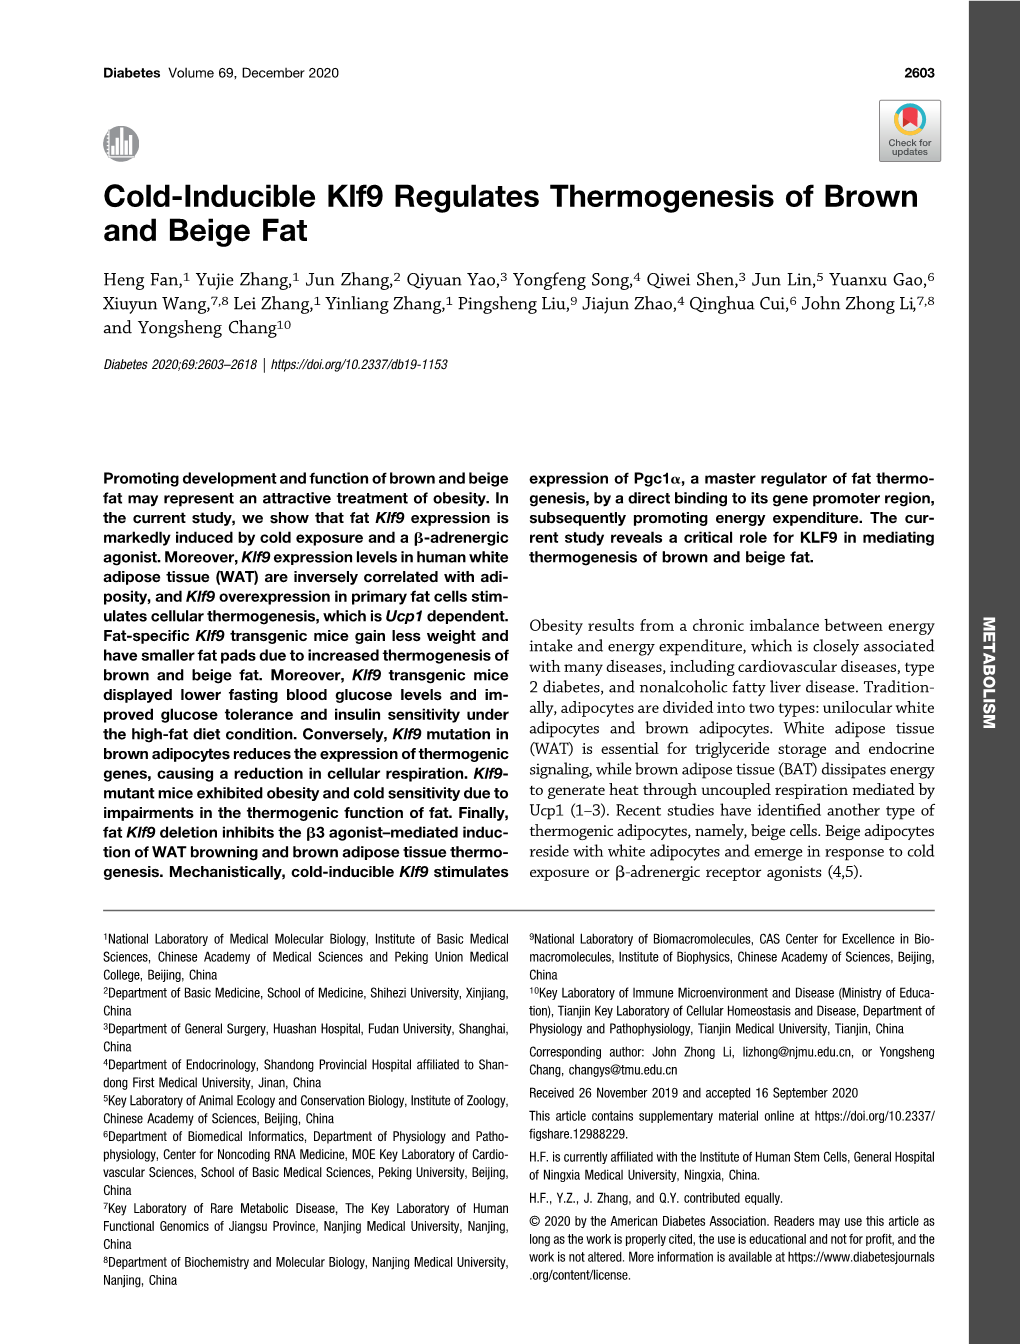 Cold-Inducible Klf9 Regulates Thermogenesis of Brown and Beige Fat